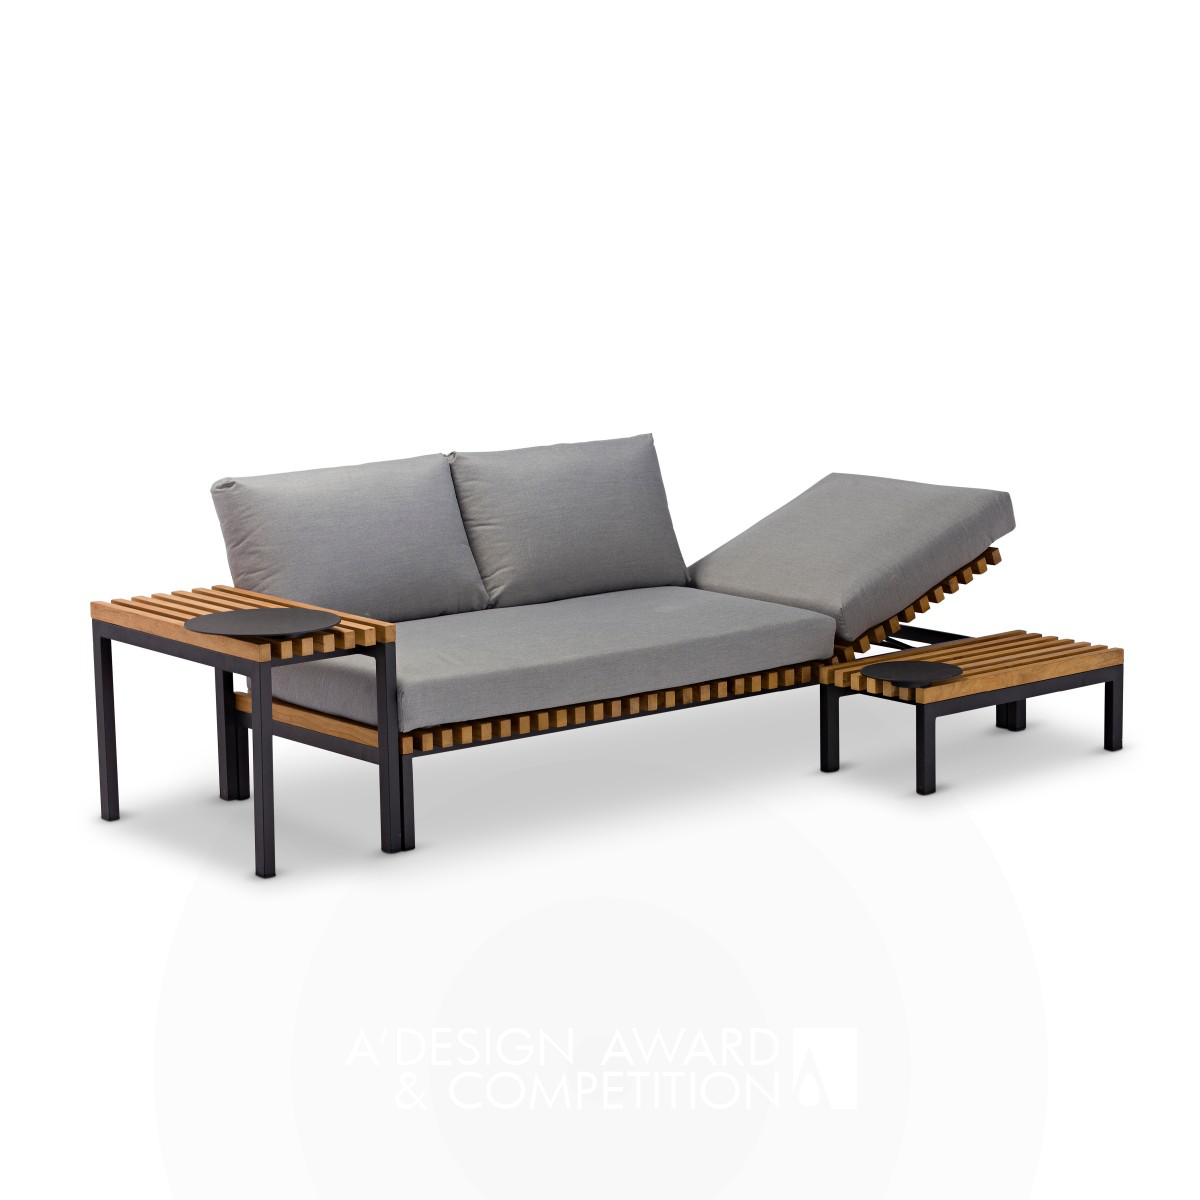 Robin Delaere Outdoor Sunlounger and Sofa